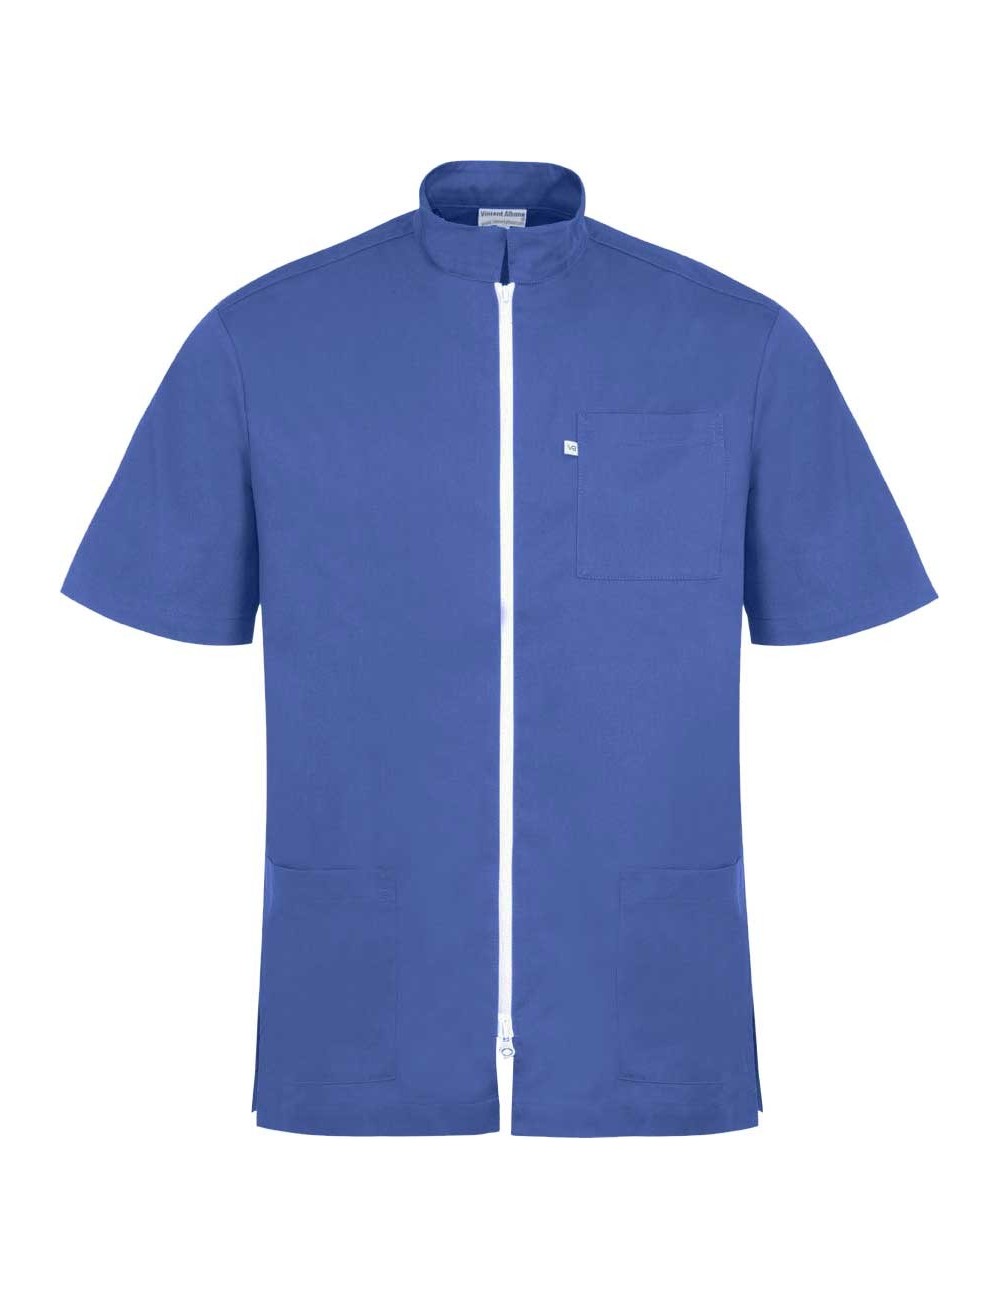 medical tunic for men with zip